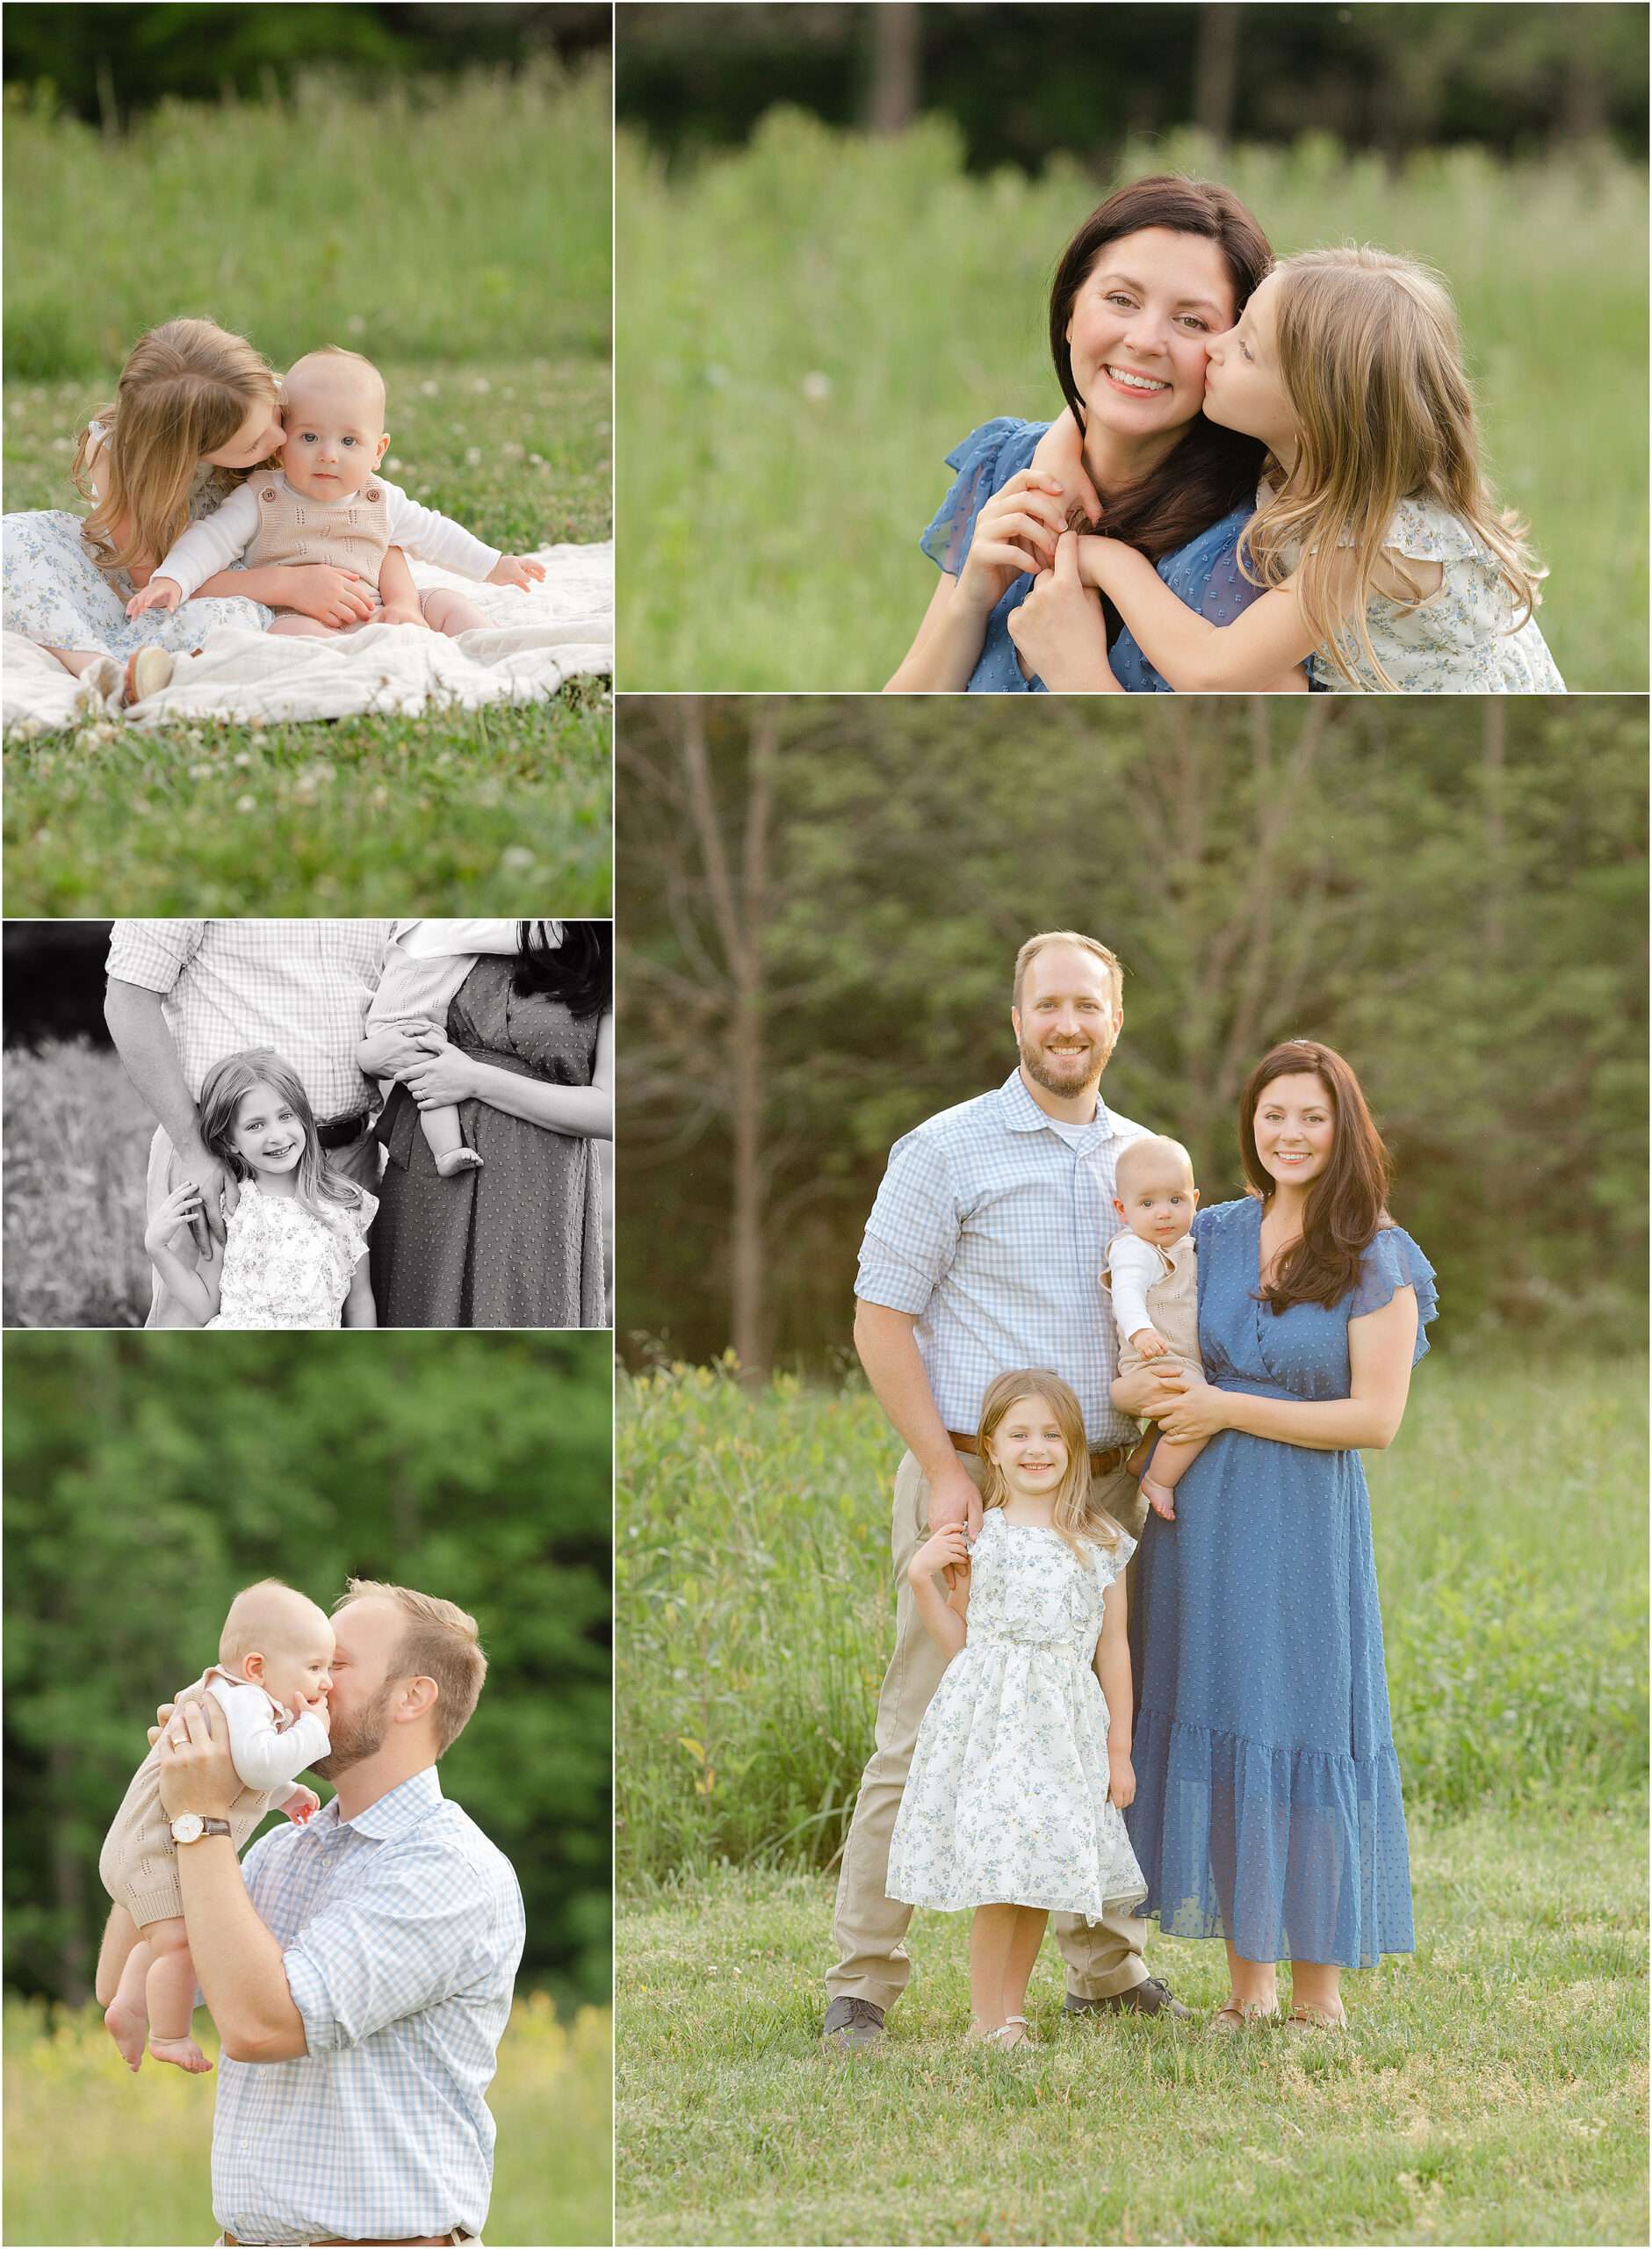 Collage of photos of a family of four outside in the spring